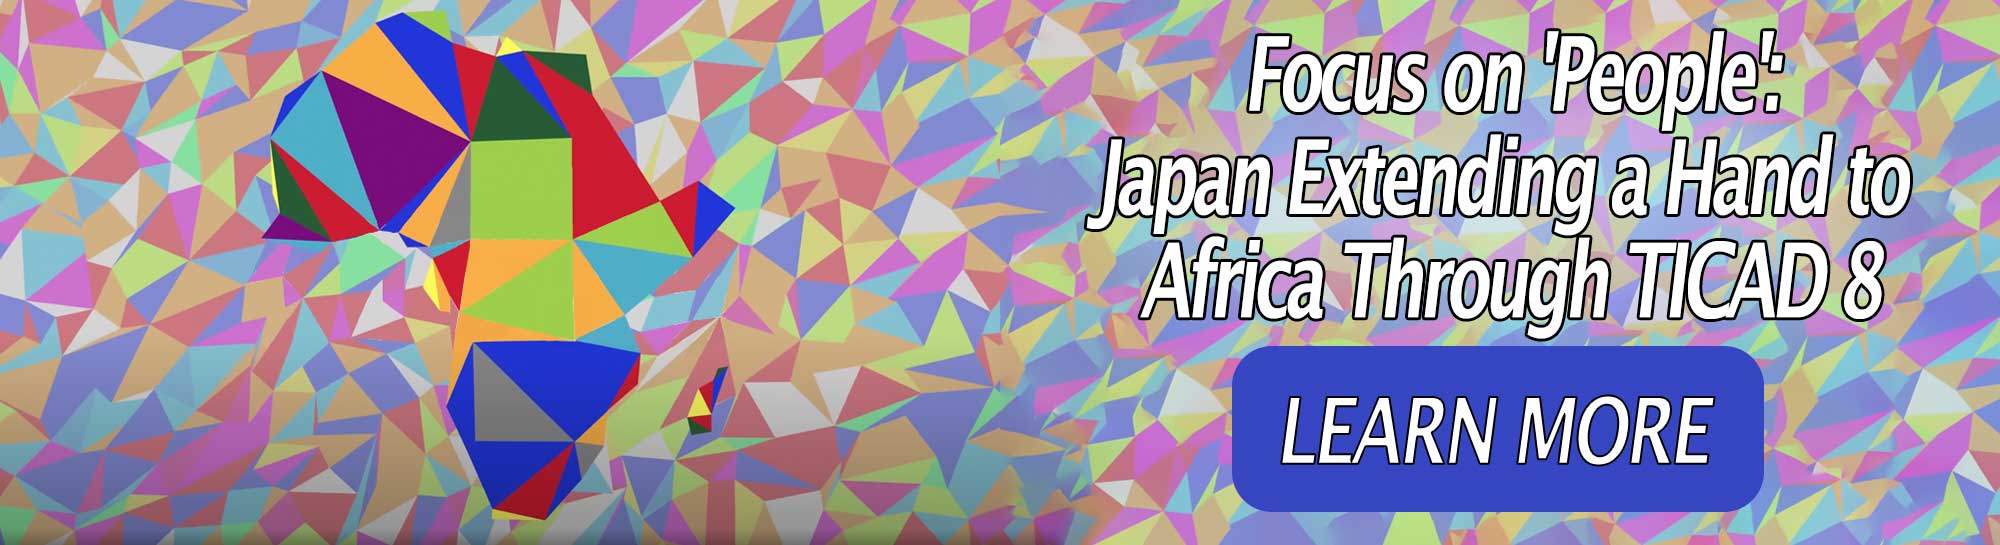 Spotlight on 'people': Japan reaches out to Africa through TICAD 8